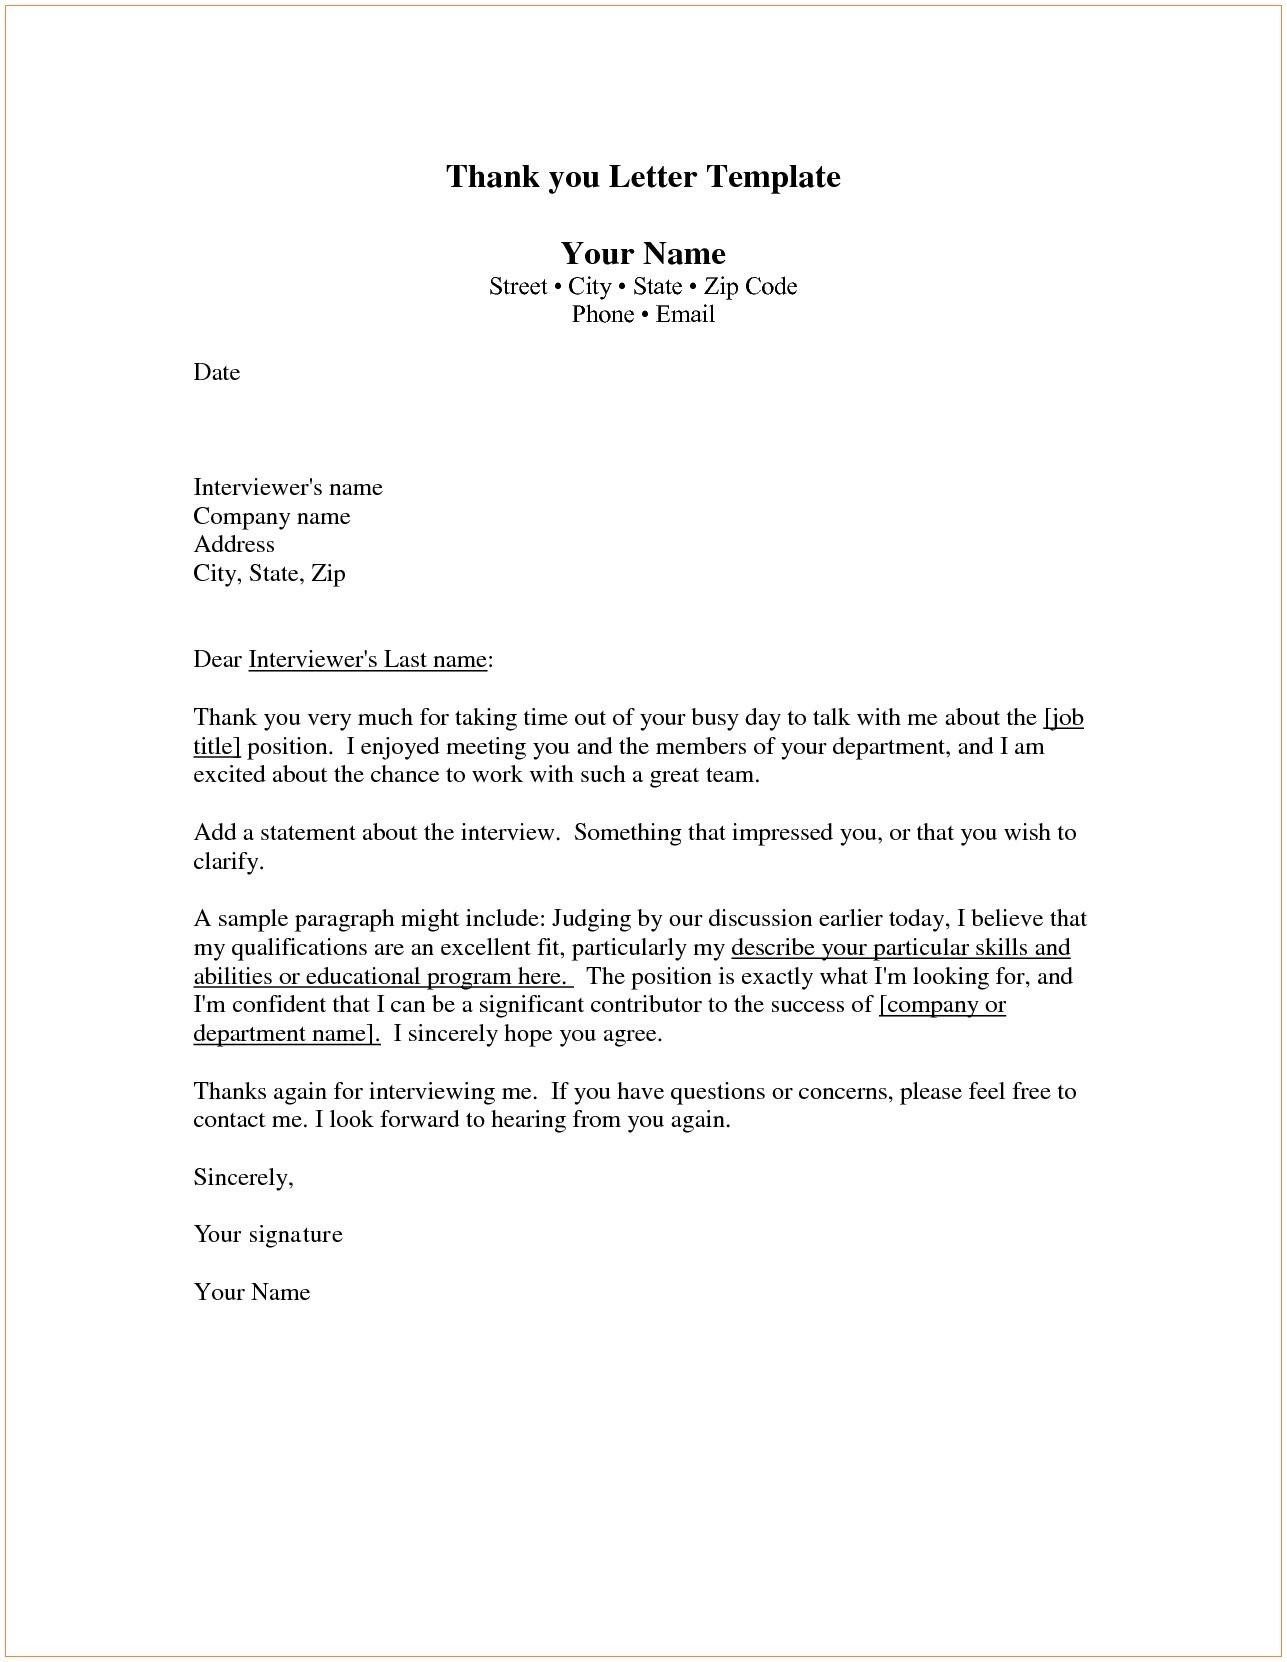 business thank you letter template example-Thank You For Your Business Letter Template Save Http Jobsearch About Od Sampleletters Ig Sample Sample Thank You 12-g